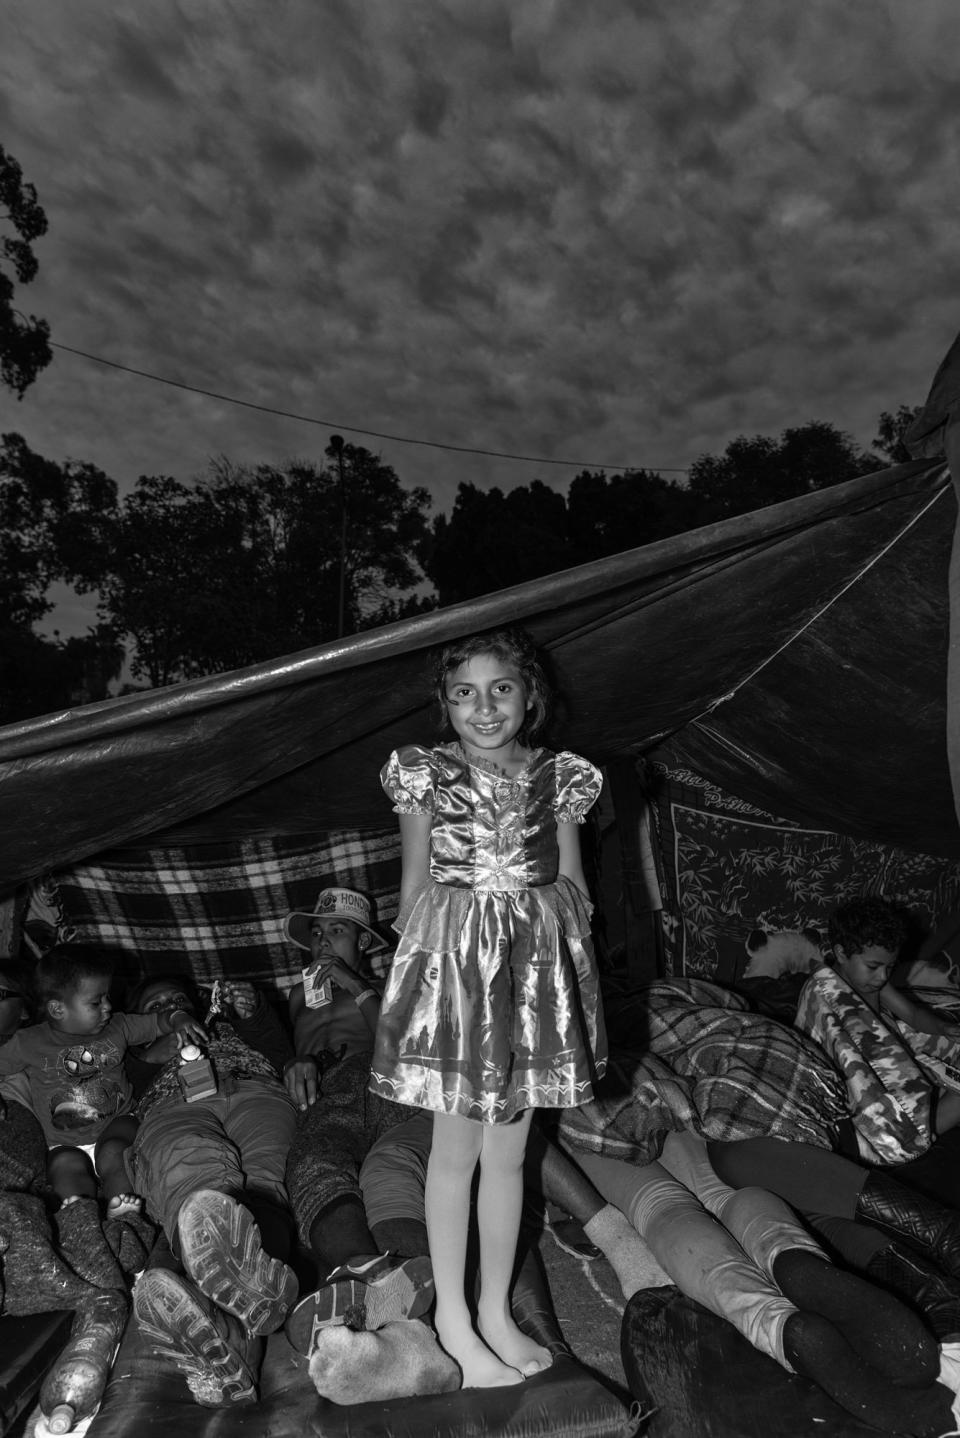 <i>The Princess, Benito Juarez Shelter</i><br />Ana rests against her tent inside Benito Juaez, a massive shelter in Tijuana, Mexico. Ana and her parents traveled from Honduras hoping to cross into the United States, but amidst the chaos at the border, they sought refuge at the shelter. (Photo: Ada Trillo)